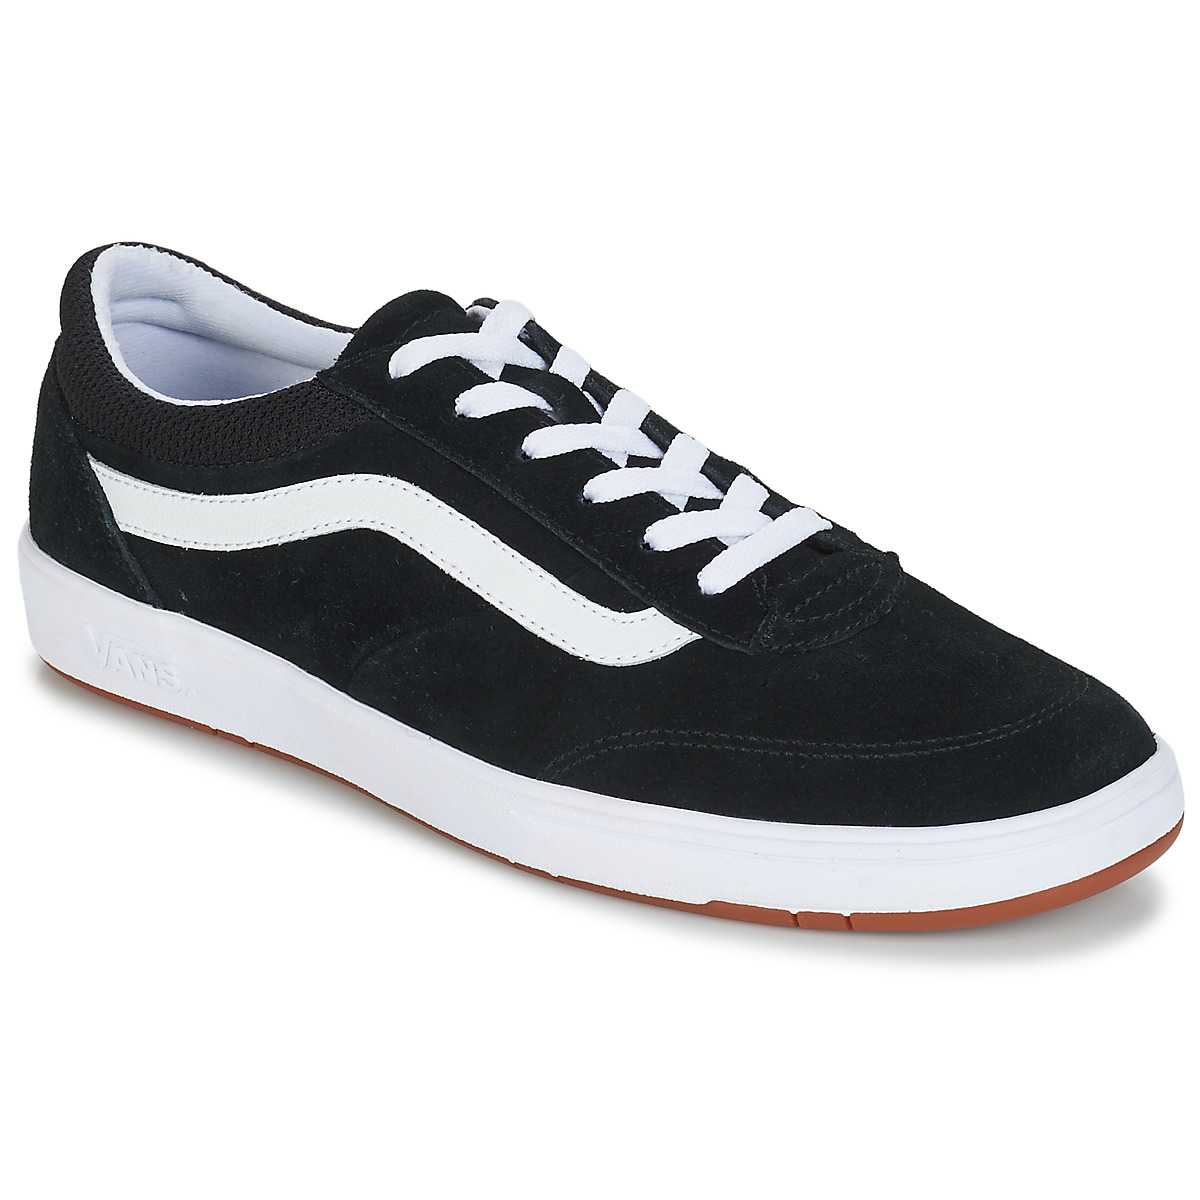 chaussures vans guadeloupe